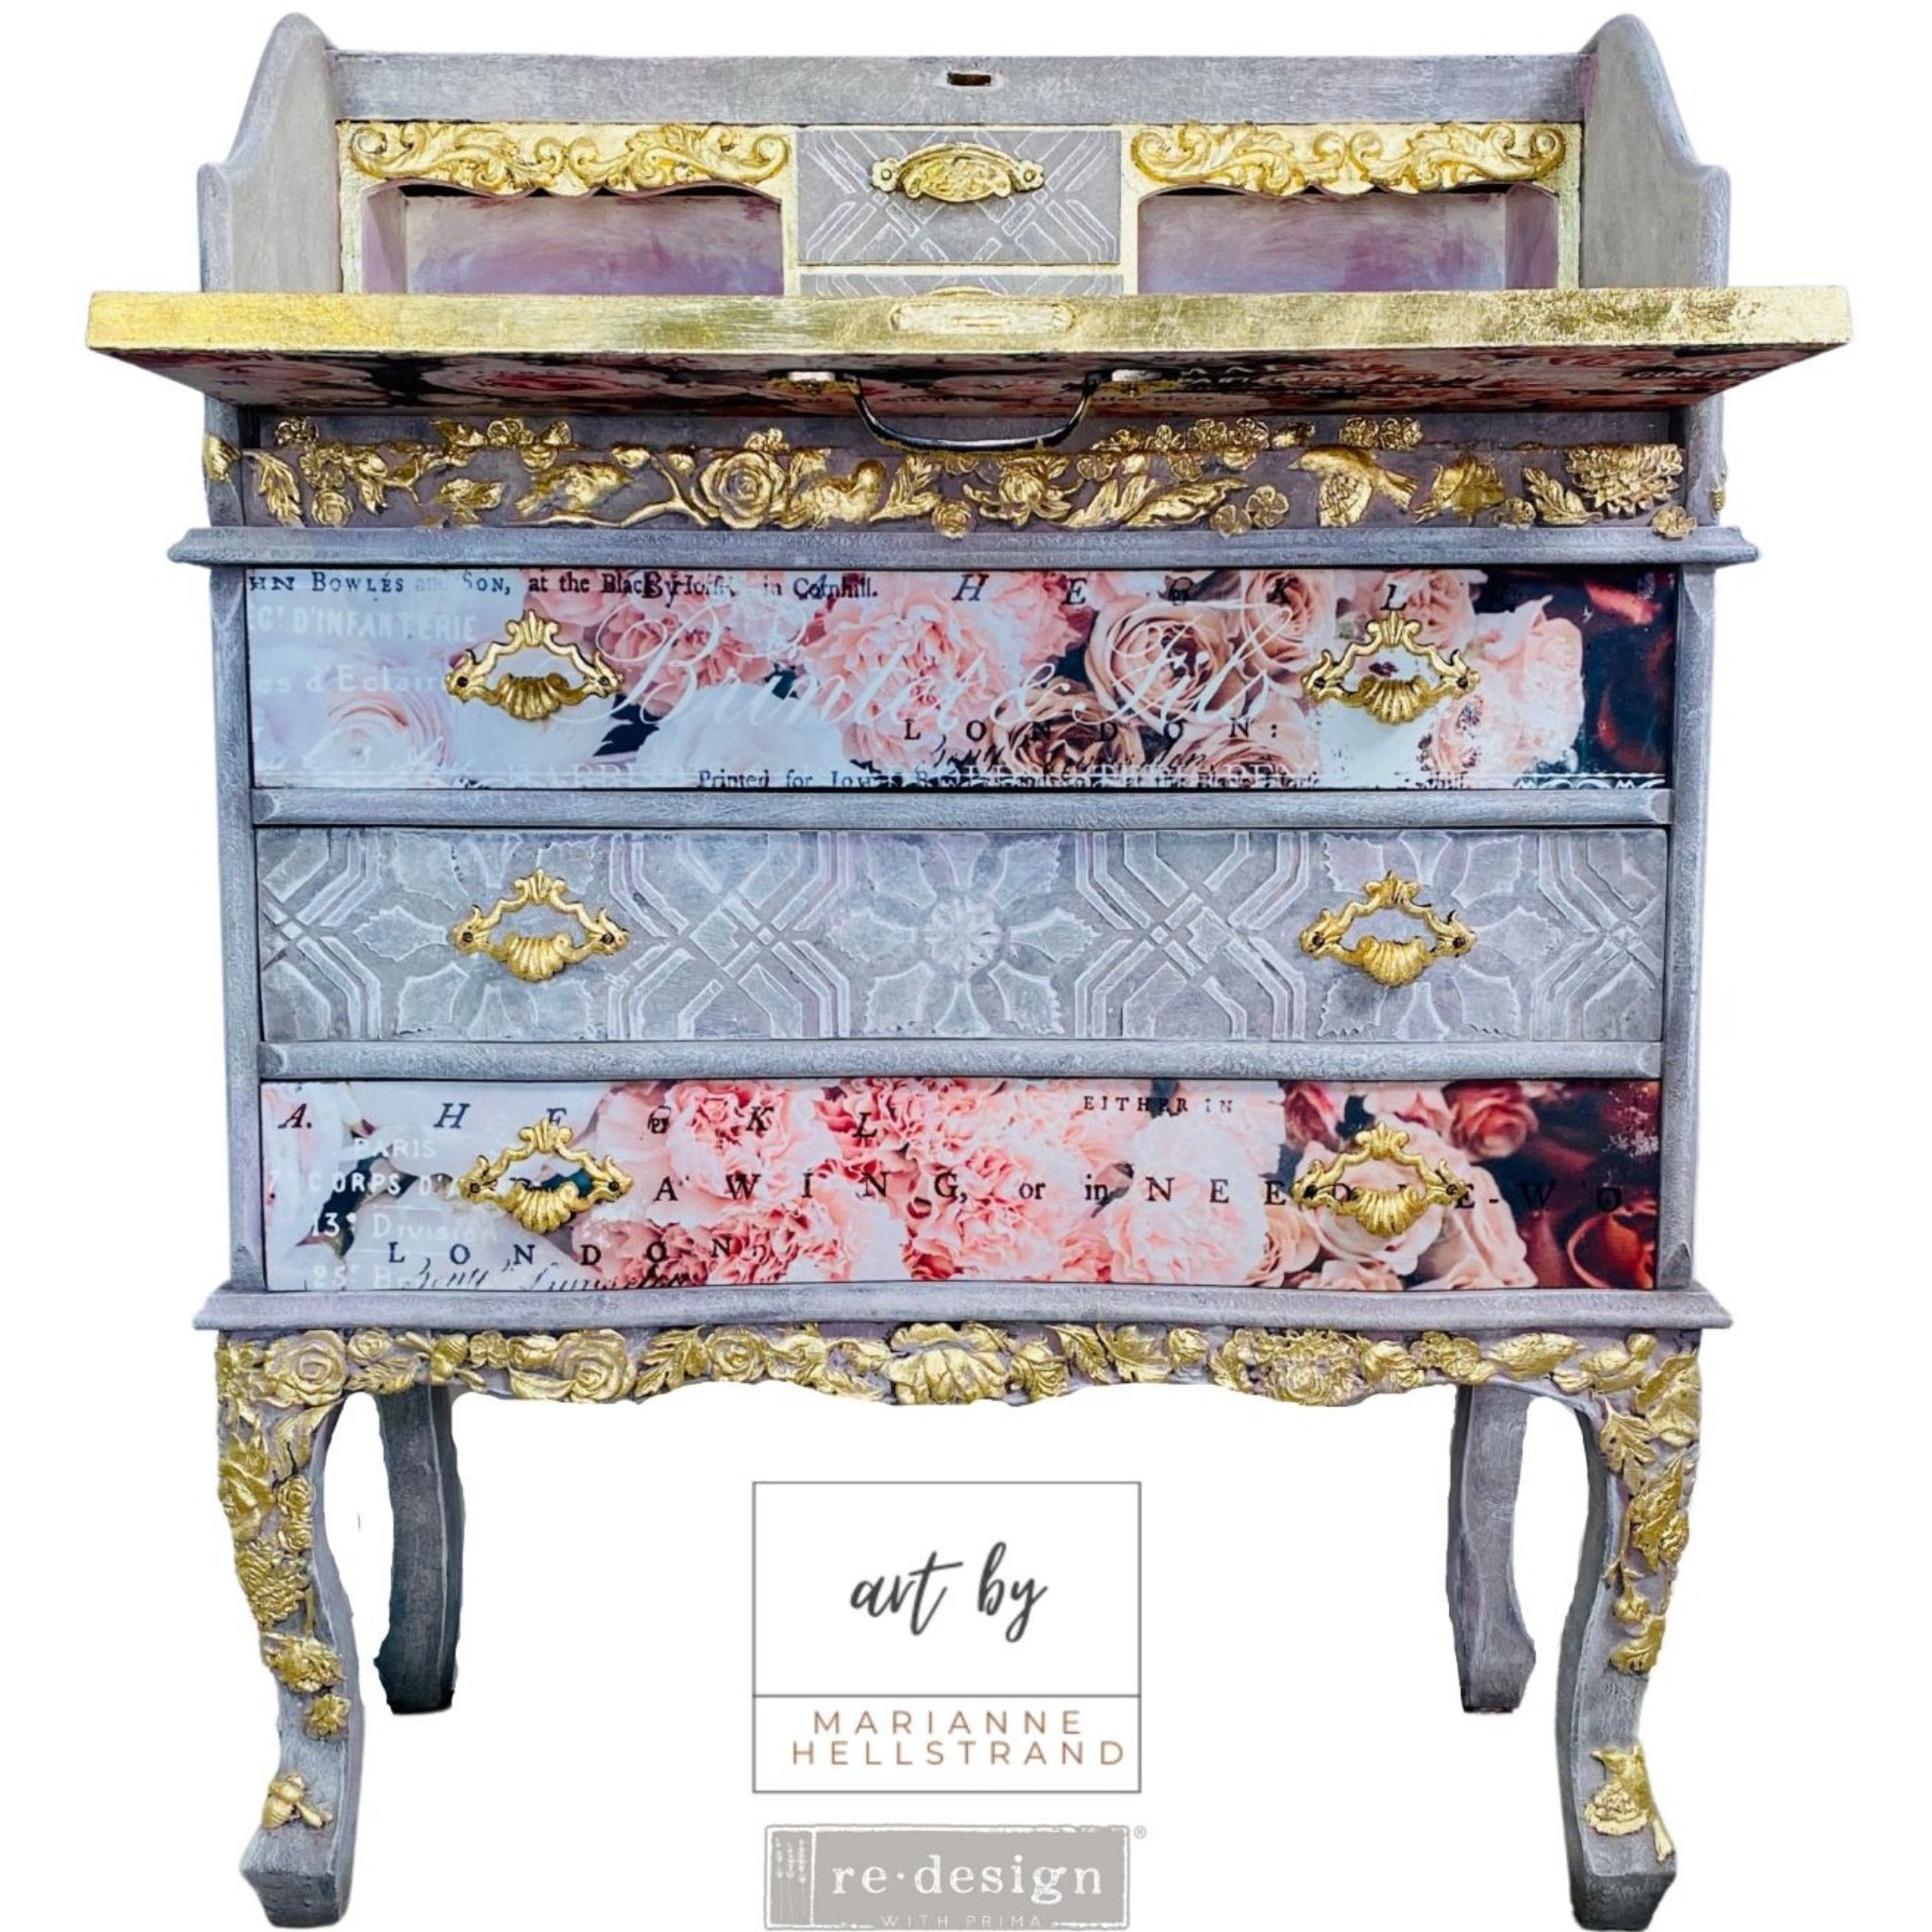 A vintage secretary's desk refurbished by Art by Marianne Hellstrand is painted light blue with gold accents and features the Fragrant Roses silicone mould on it.